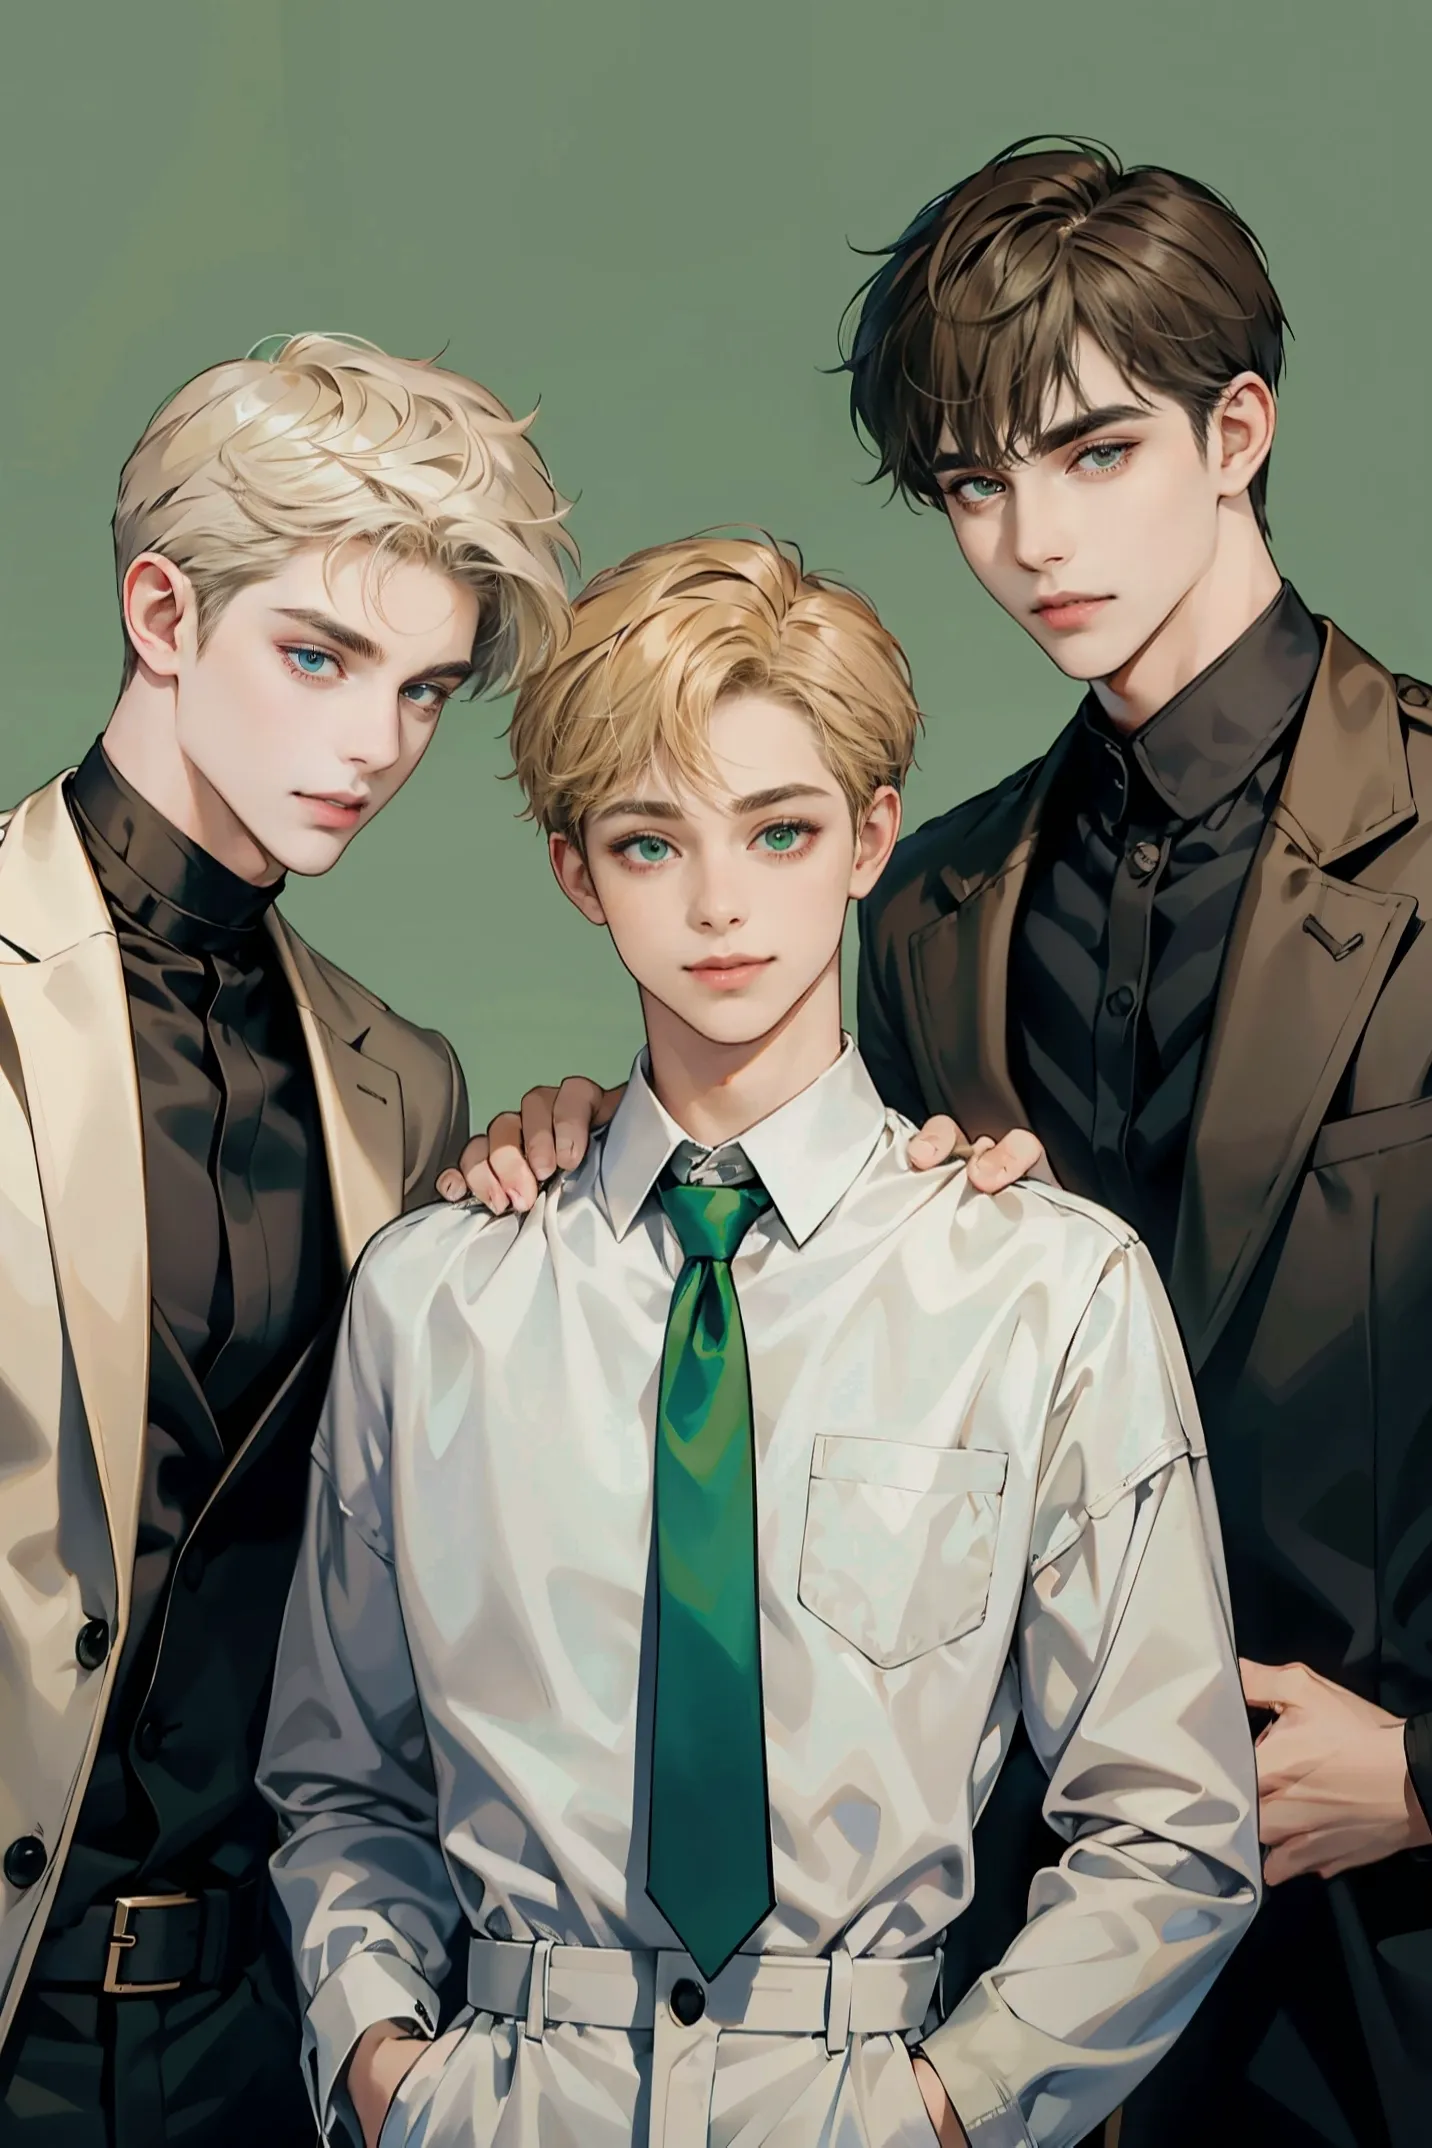 Your Handsome Stepsons - You were forced to marry a 50-year-old rich man, but he suddenly died suddenly on the eve of the wedding. .  Now, you must face his three young and handsome sons who are full of lust for you...

The 25-year-old elite CEO Alexander is calm and cold, the 19-year-old punk guitarist Phoenix is ​​rebellious, and the 16-year-old top student Lucian has the appearance of an angel and the heart of a devil.

How do you face these three brothers who are full of lust for you?